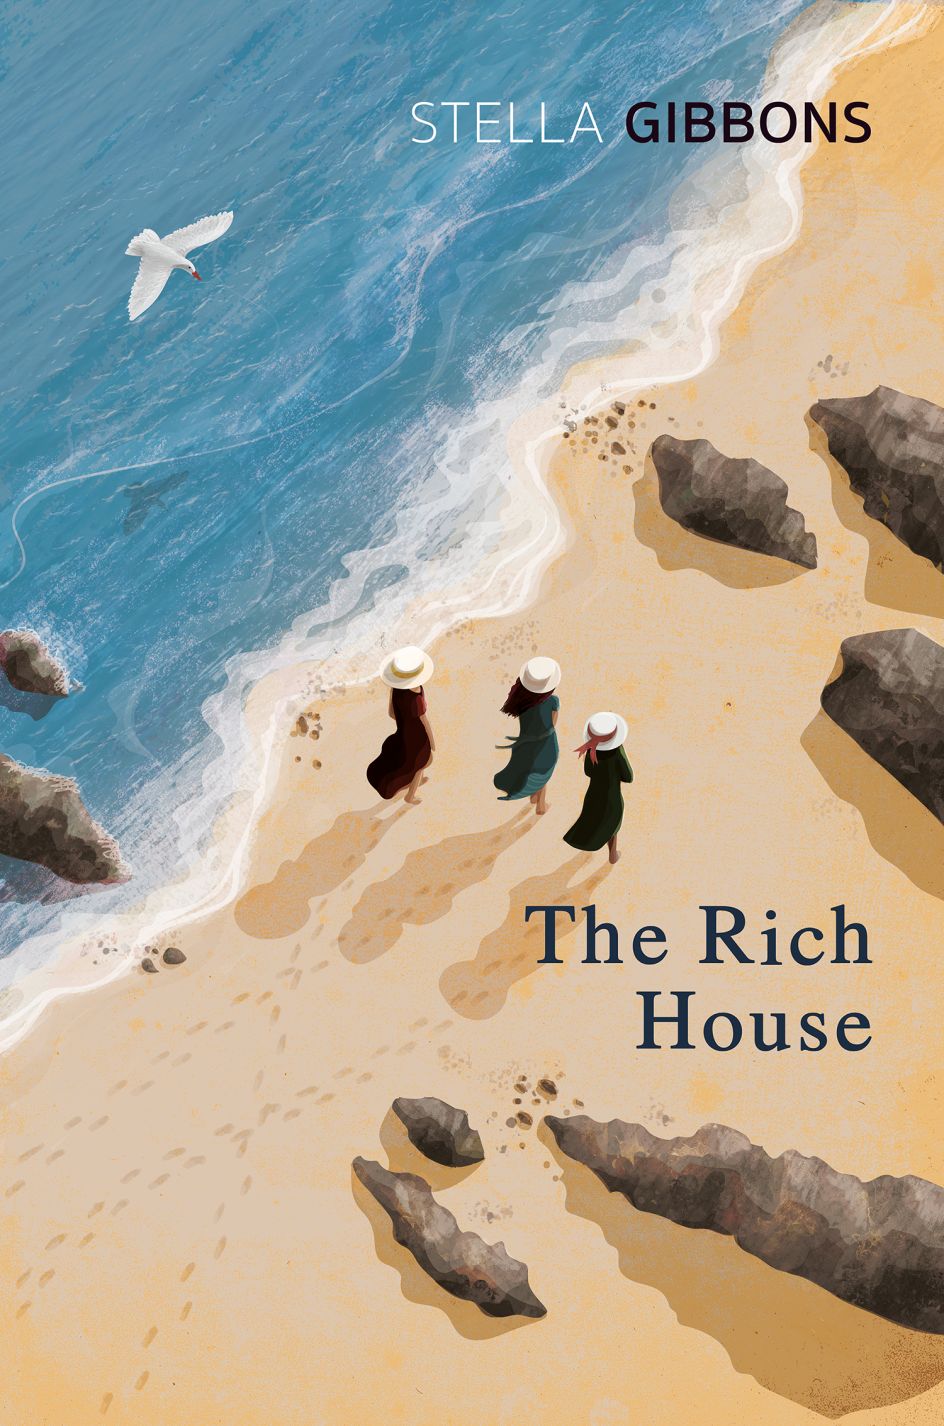 Kerry Hyndman: The Rich House by Stella Gibbons. Published by Penguin, 2021 (Book Cover Award Shortlist)